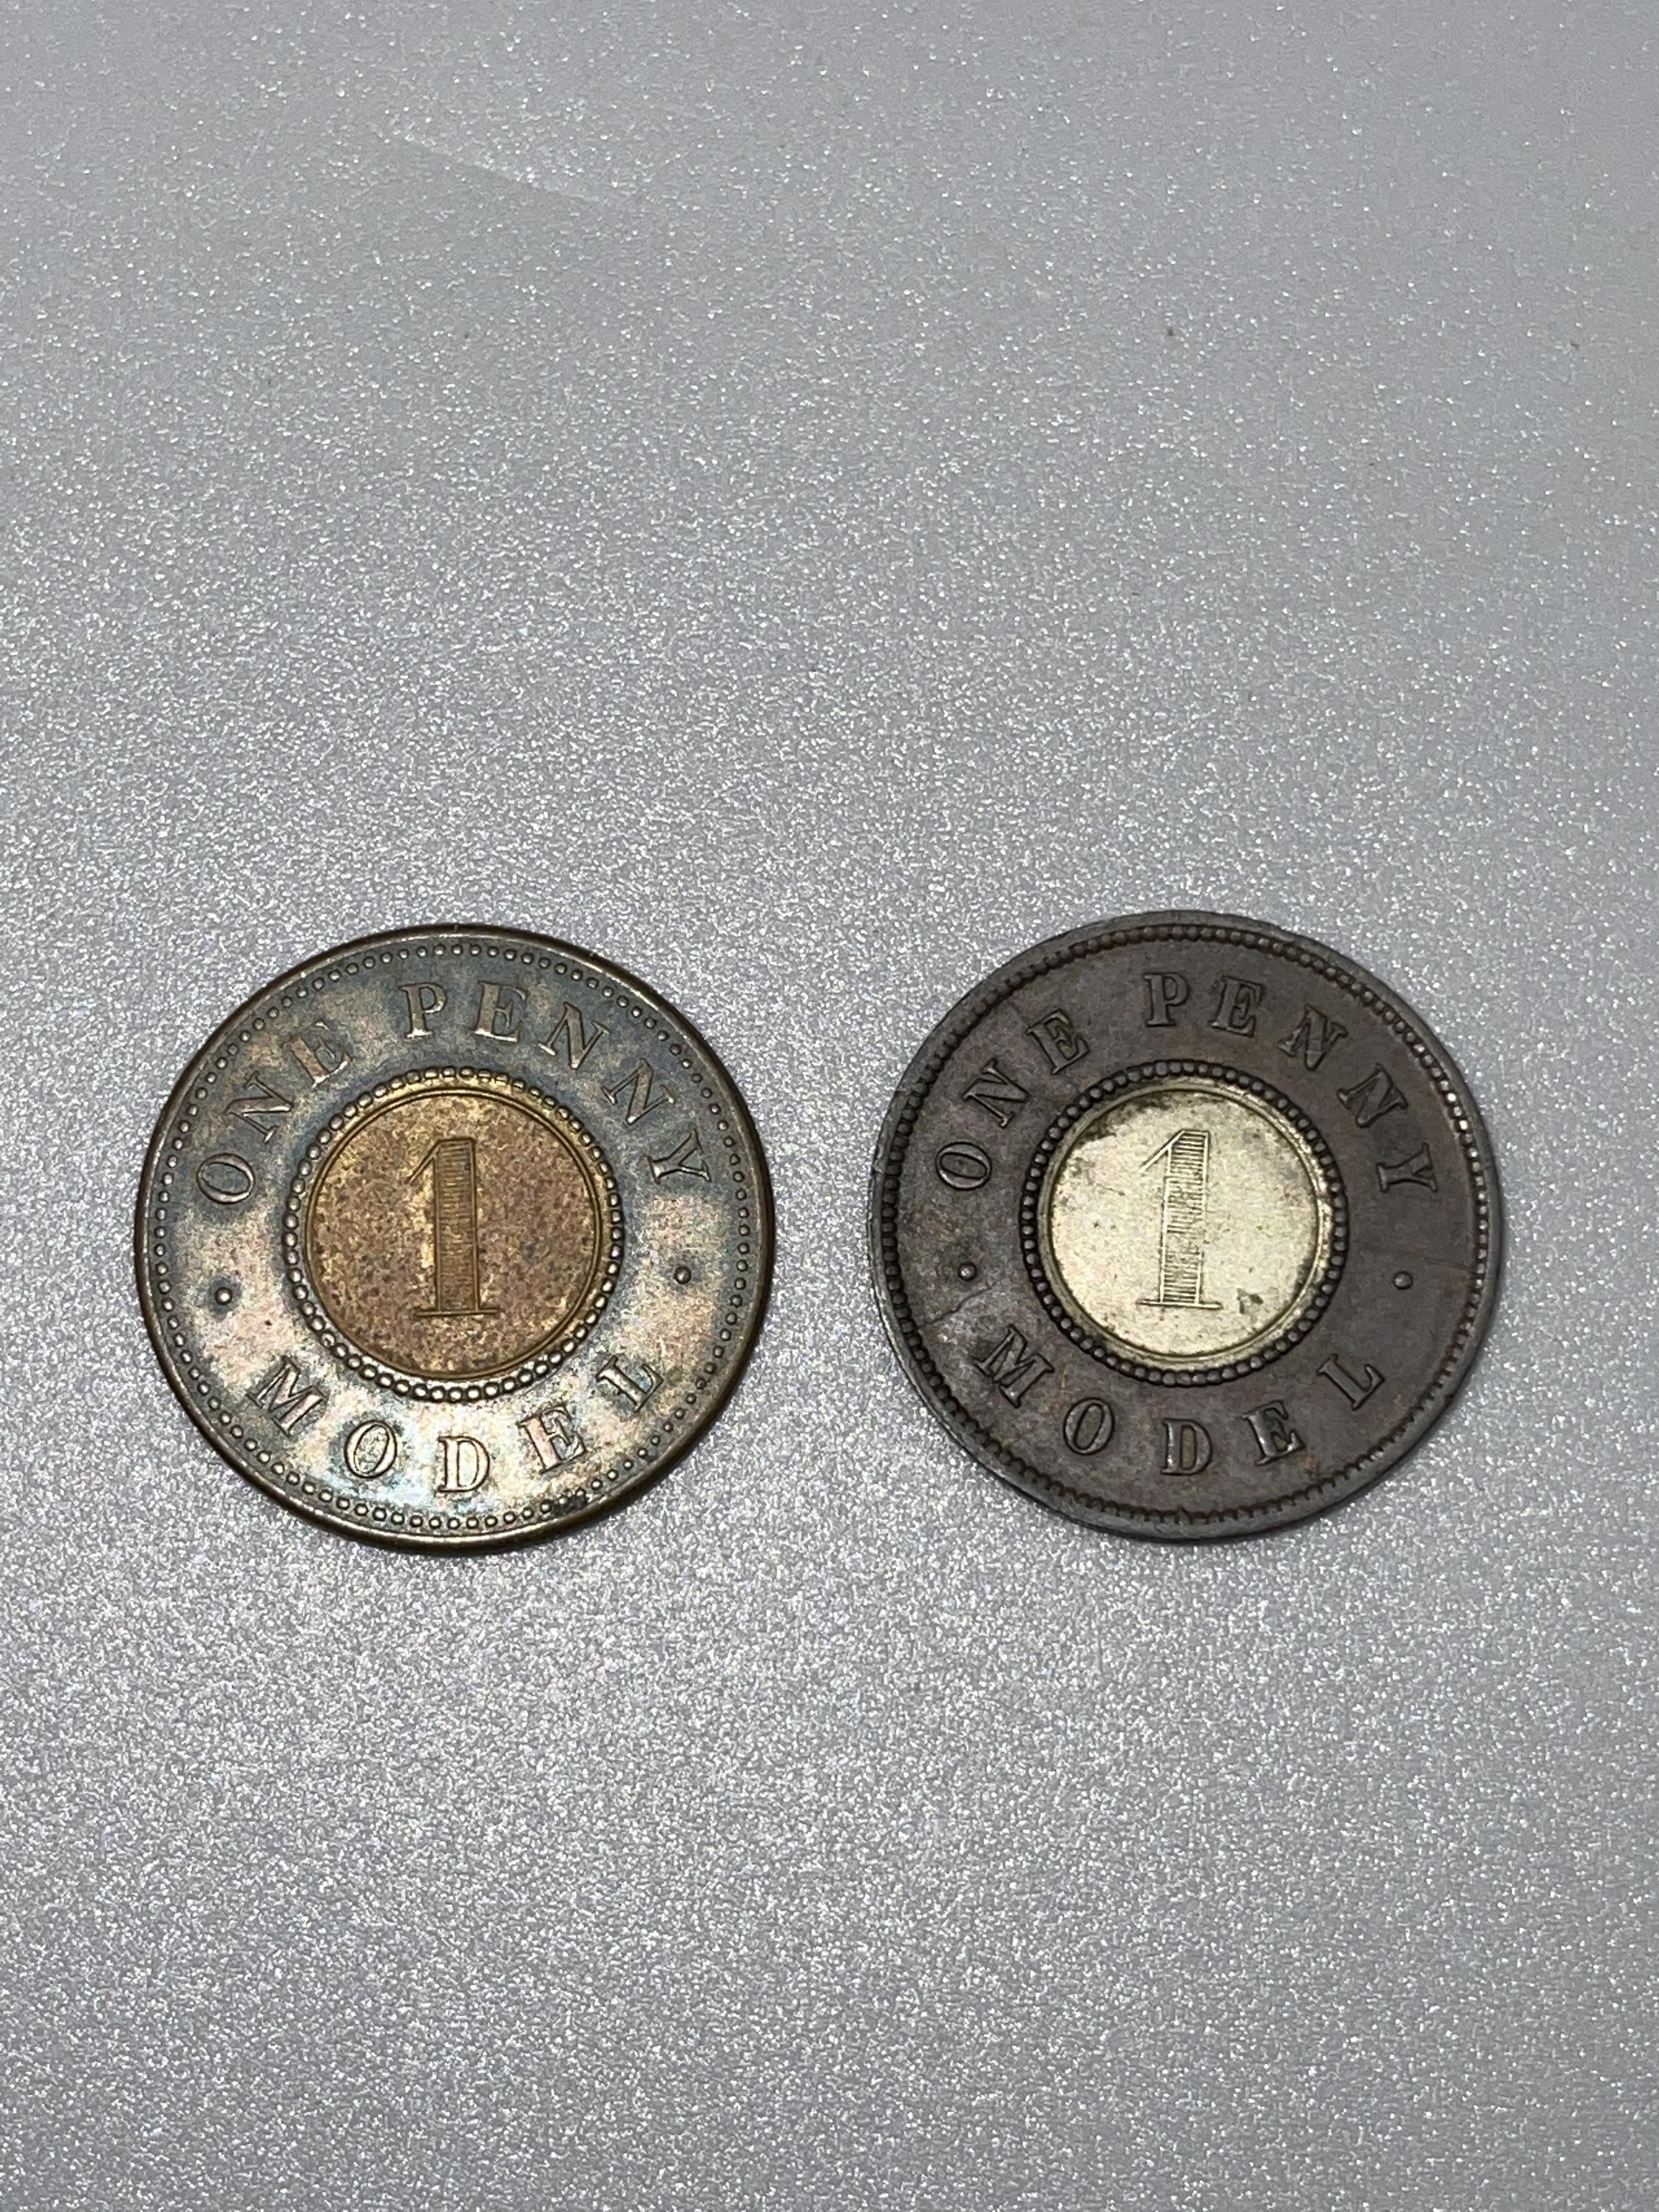 High grade Half and third farthings and model coin - Image 5 of 6